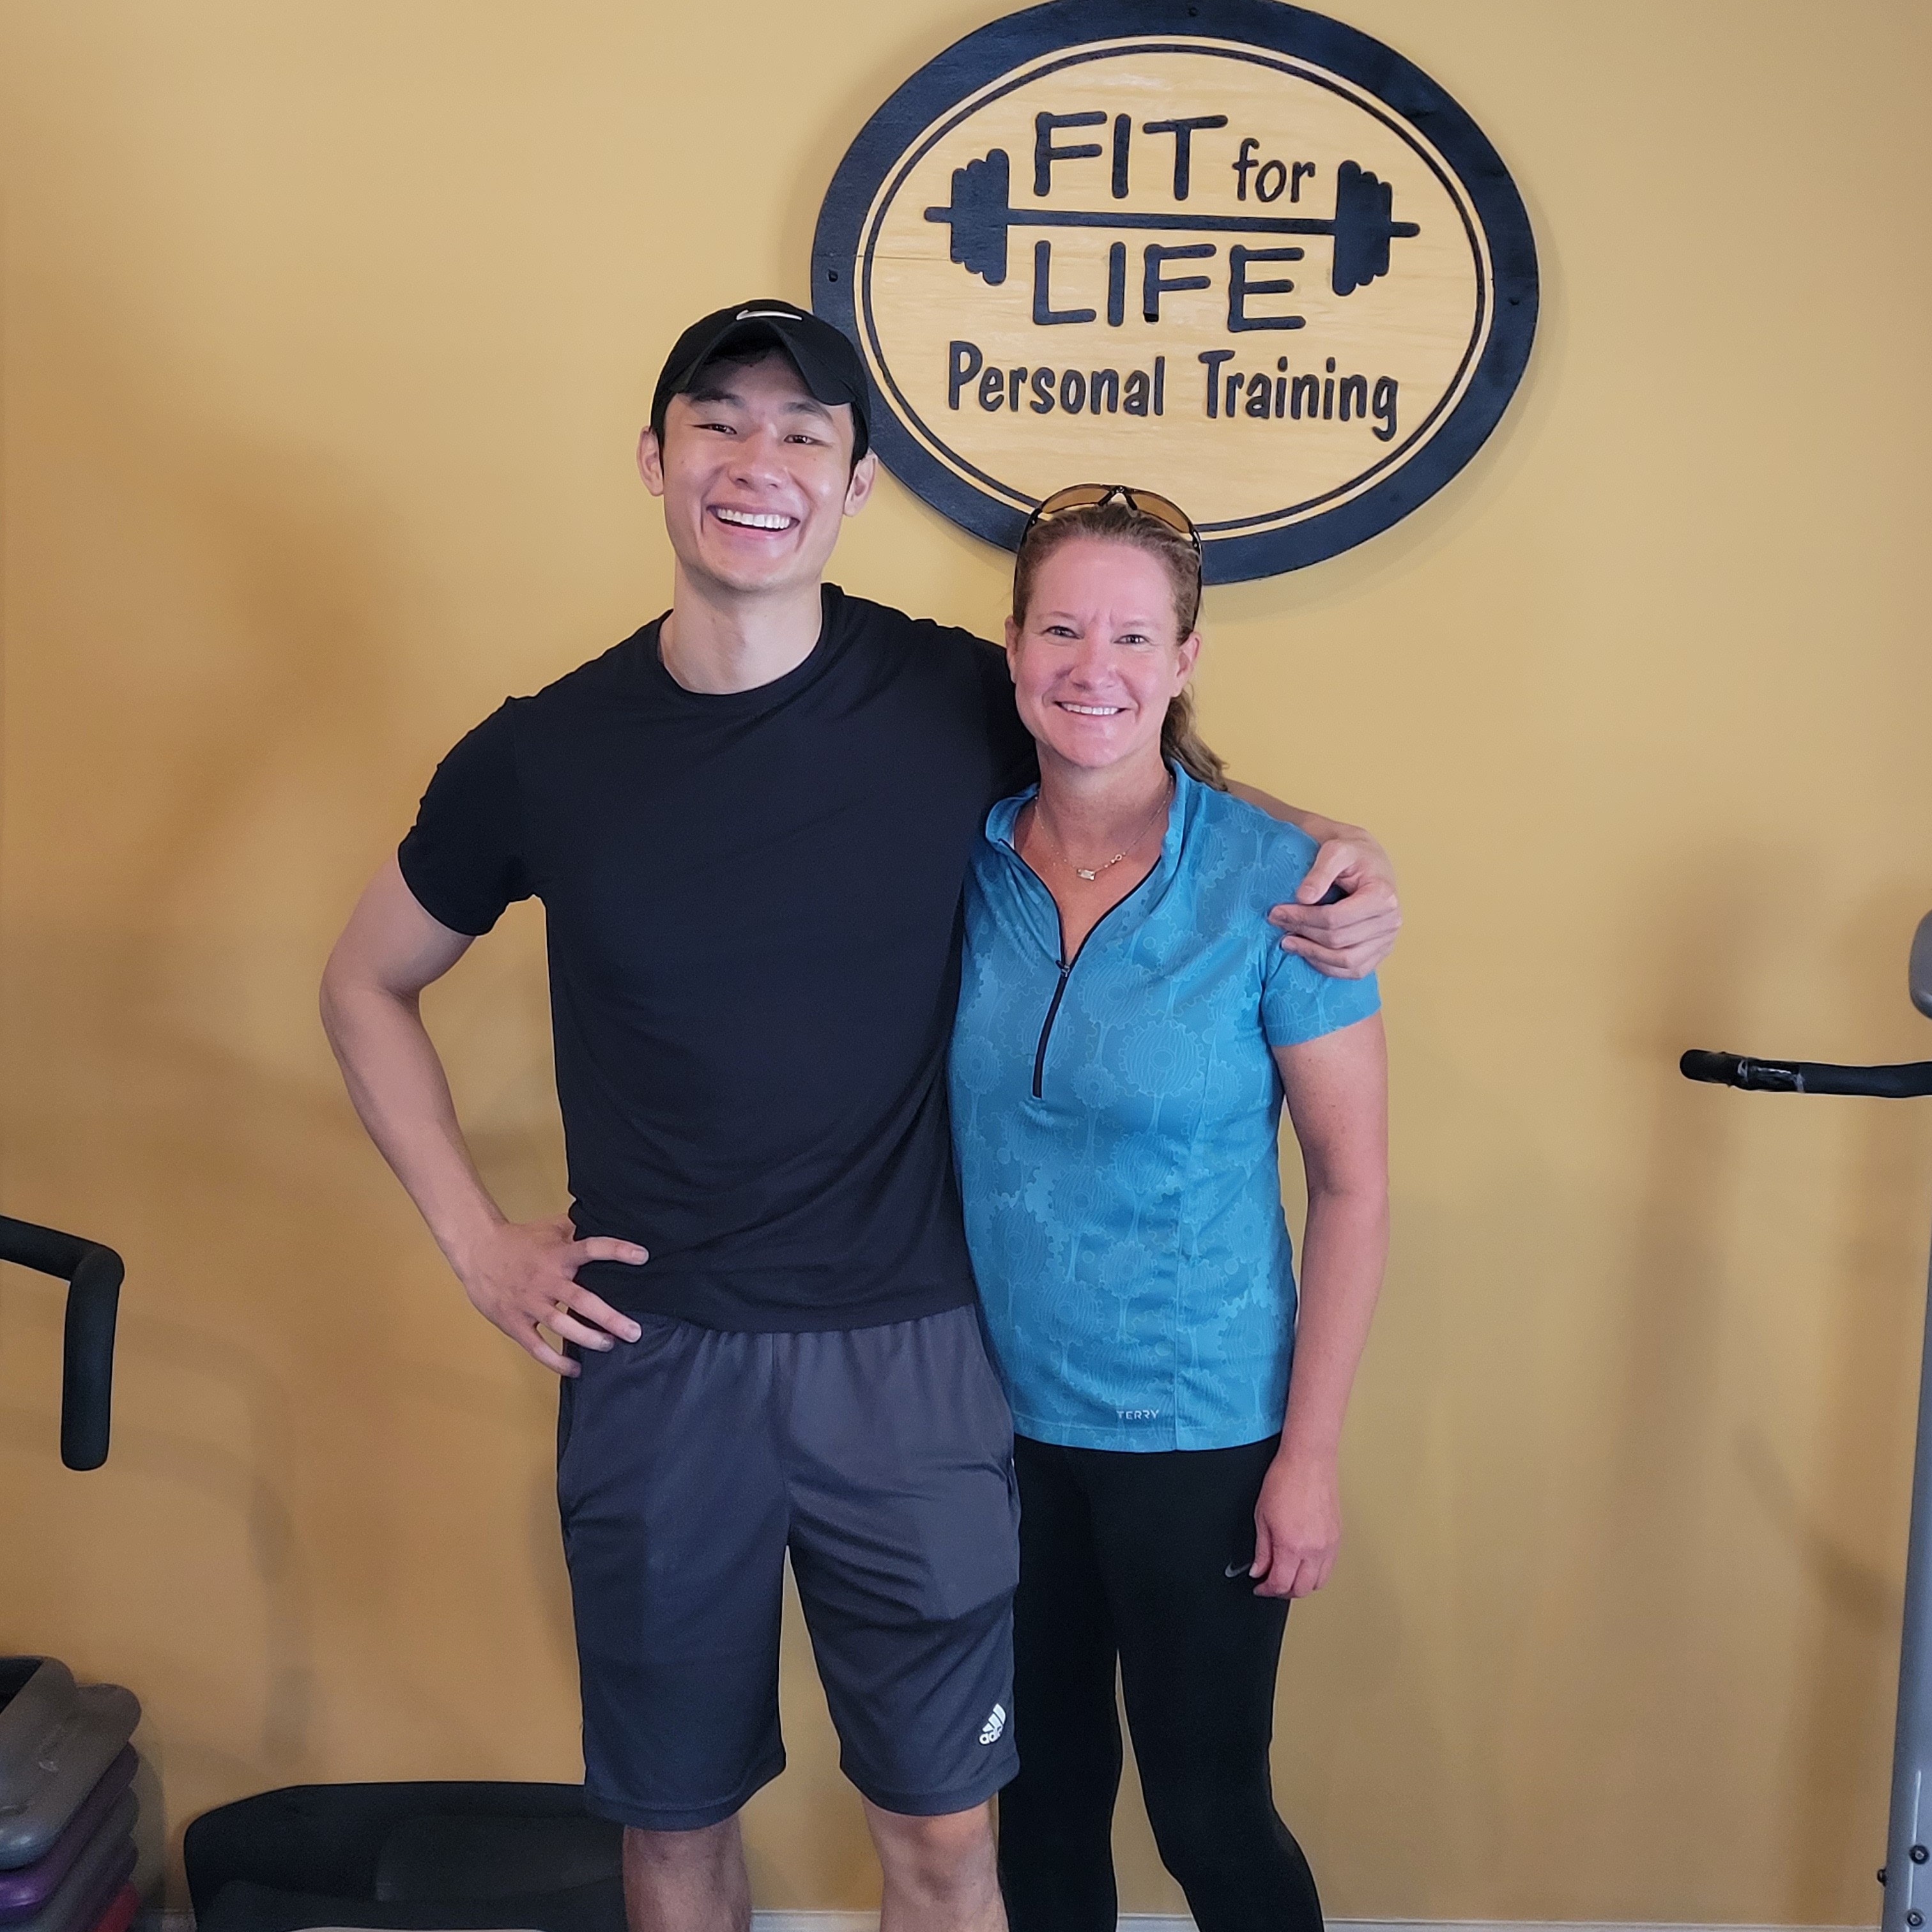 A happy customer of Fit For Life Personal Training